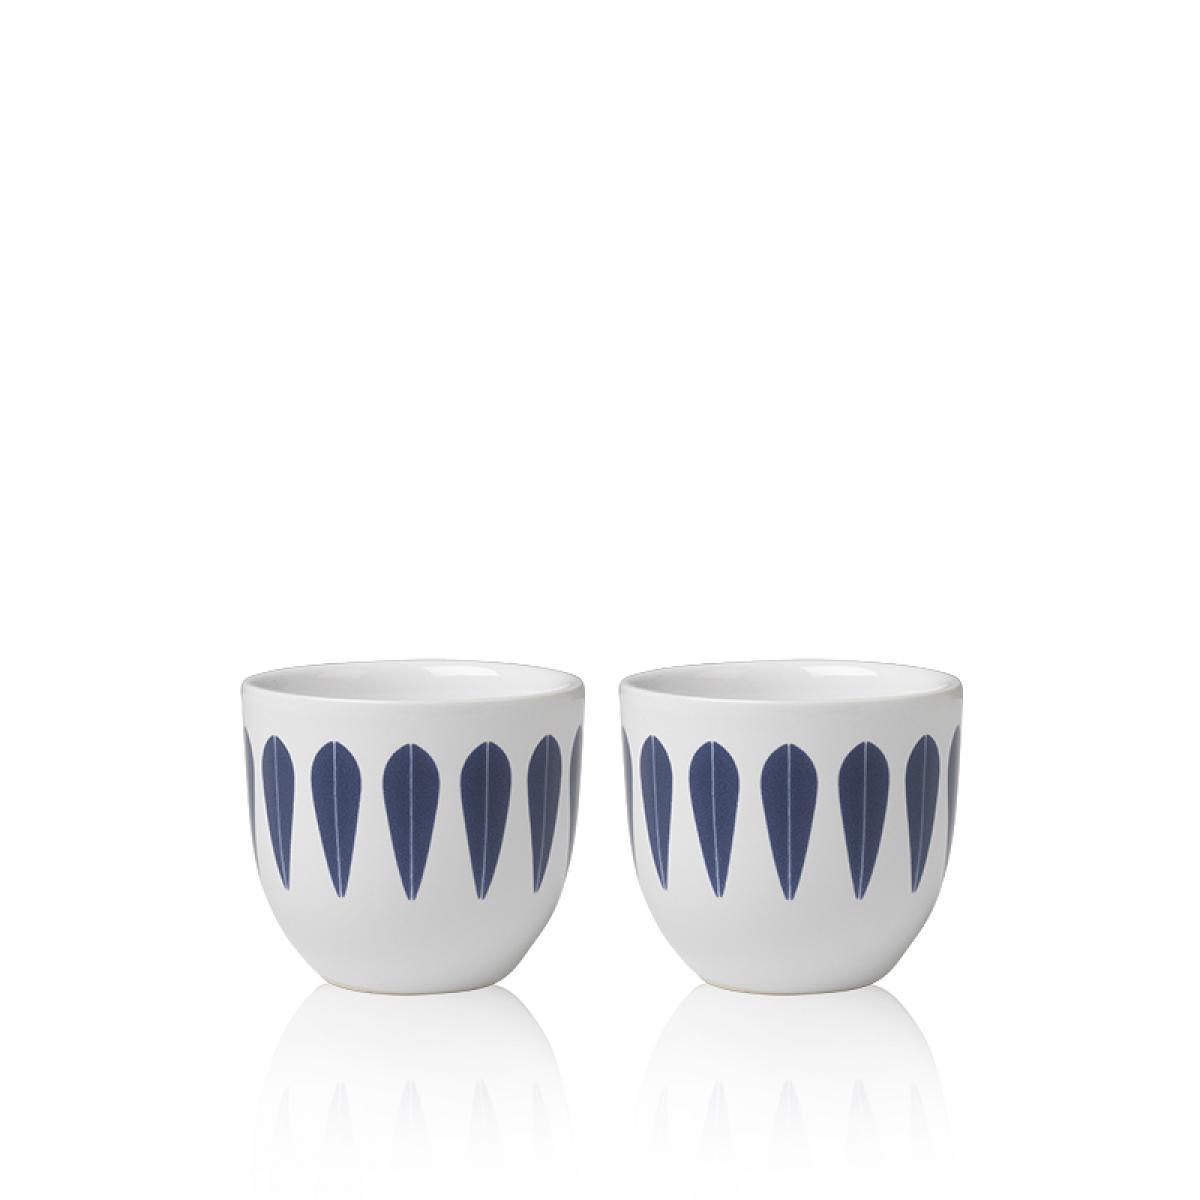 Lucie Kaas Arne Clausen Egg Cup donkerblauw, 2 pc's.